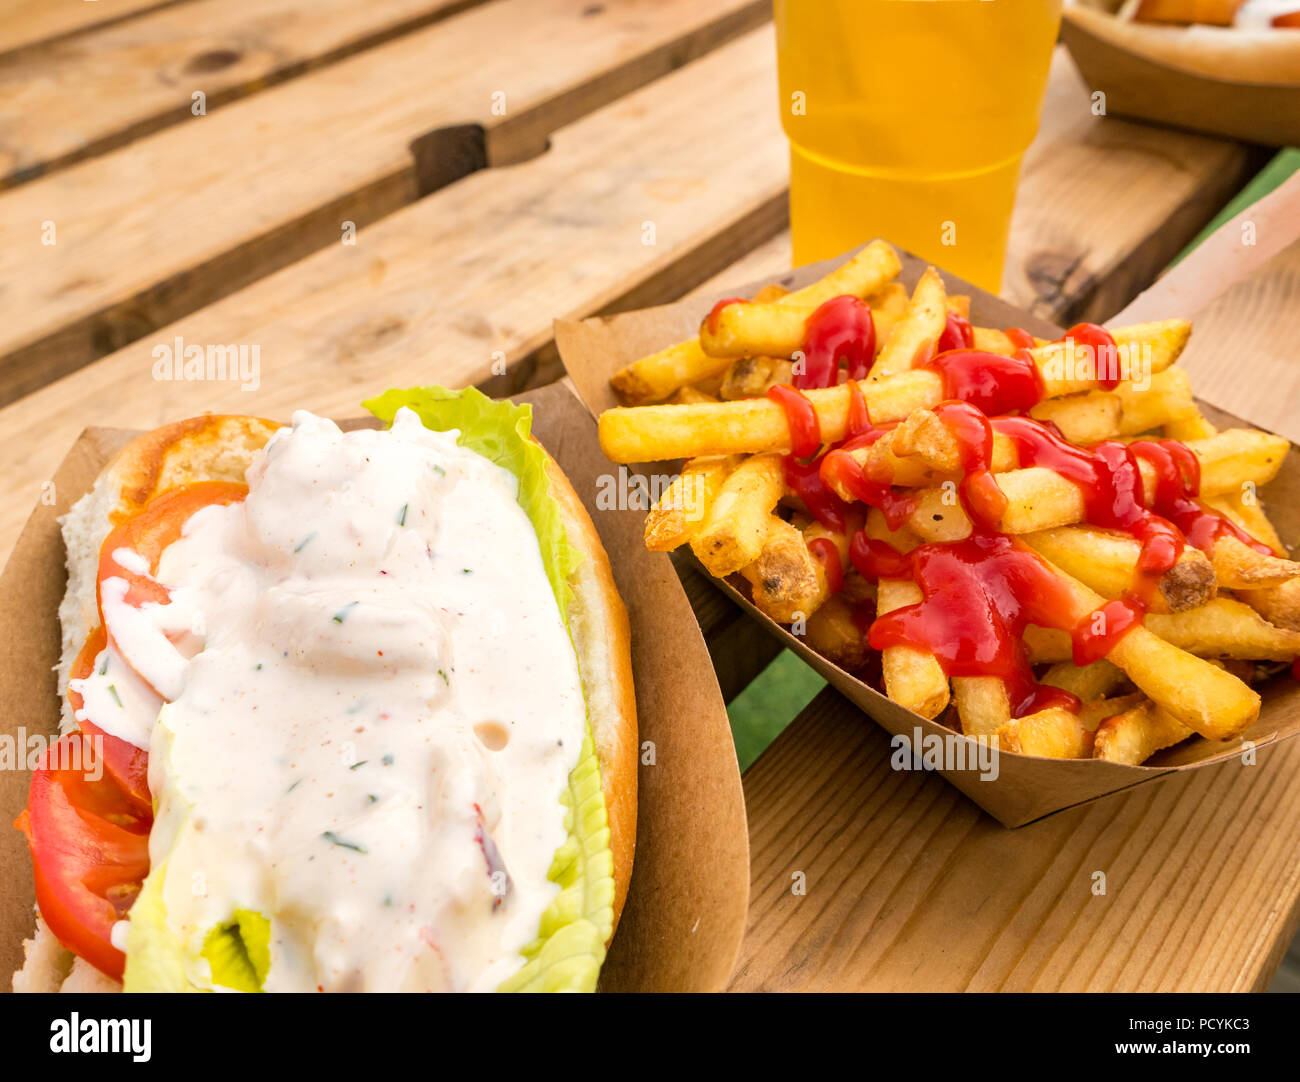 Takeaway food of lobster roll with chips or french fries with ketchup and a half pint of lager in a plastic glass on an outdoor picnic table Stock Photo